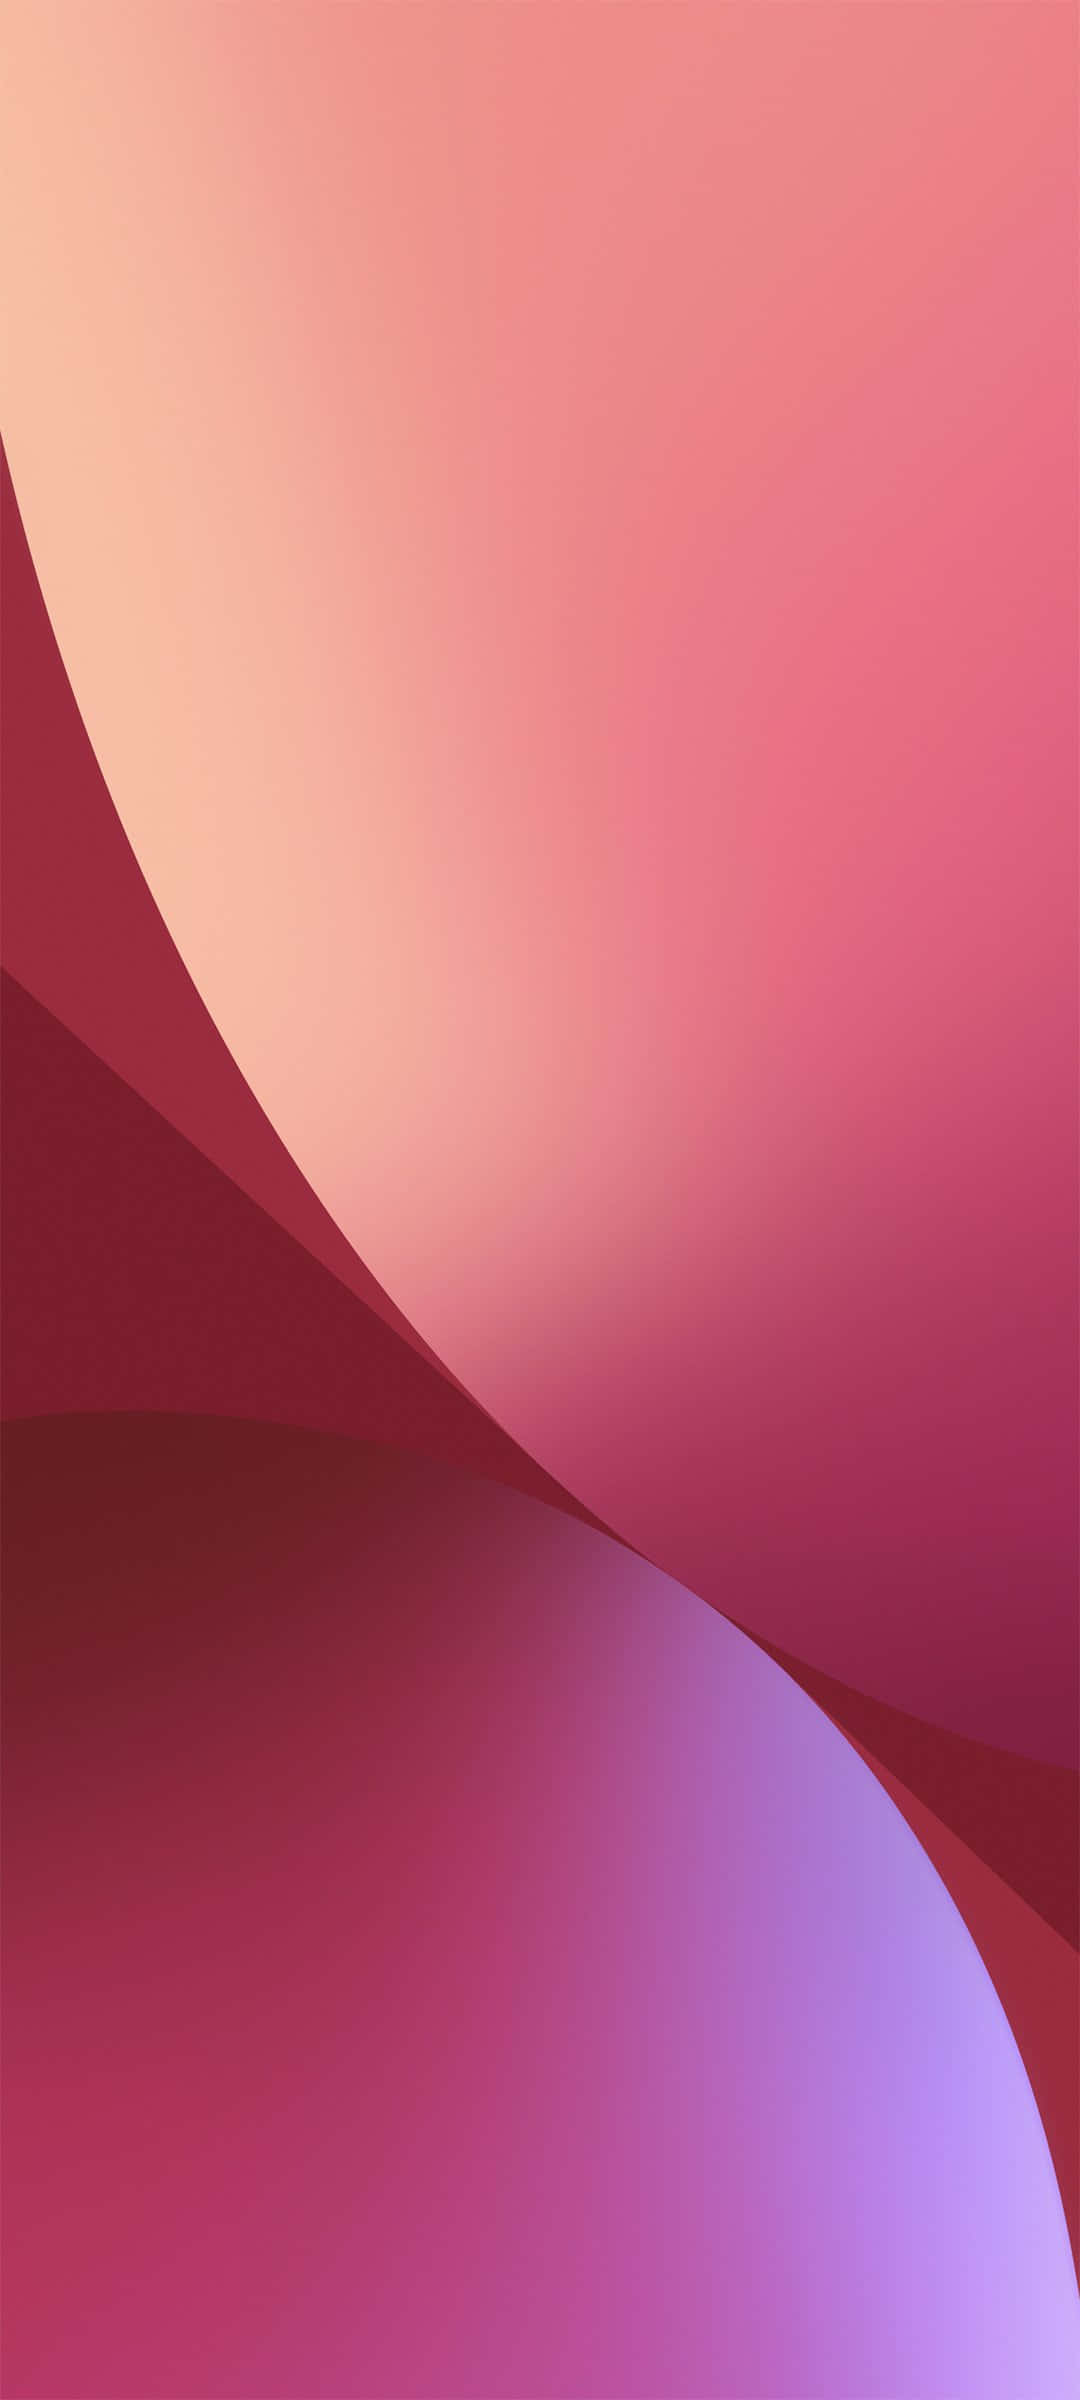 Xiaomi-Themed Background with an Abstract Design